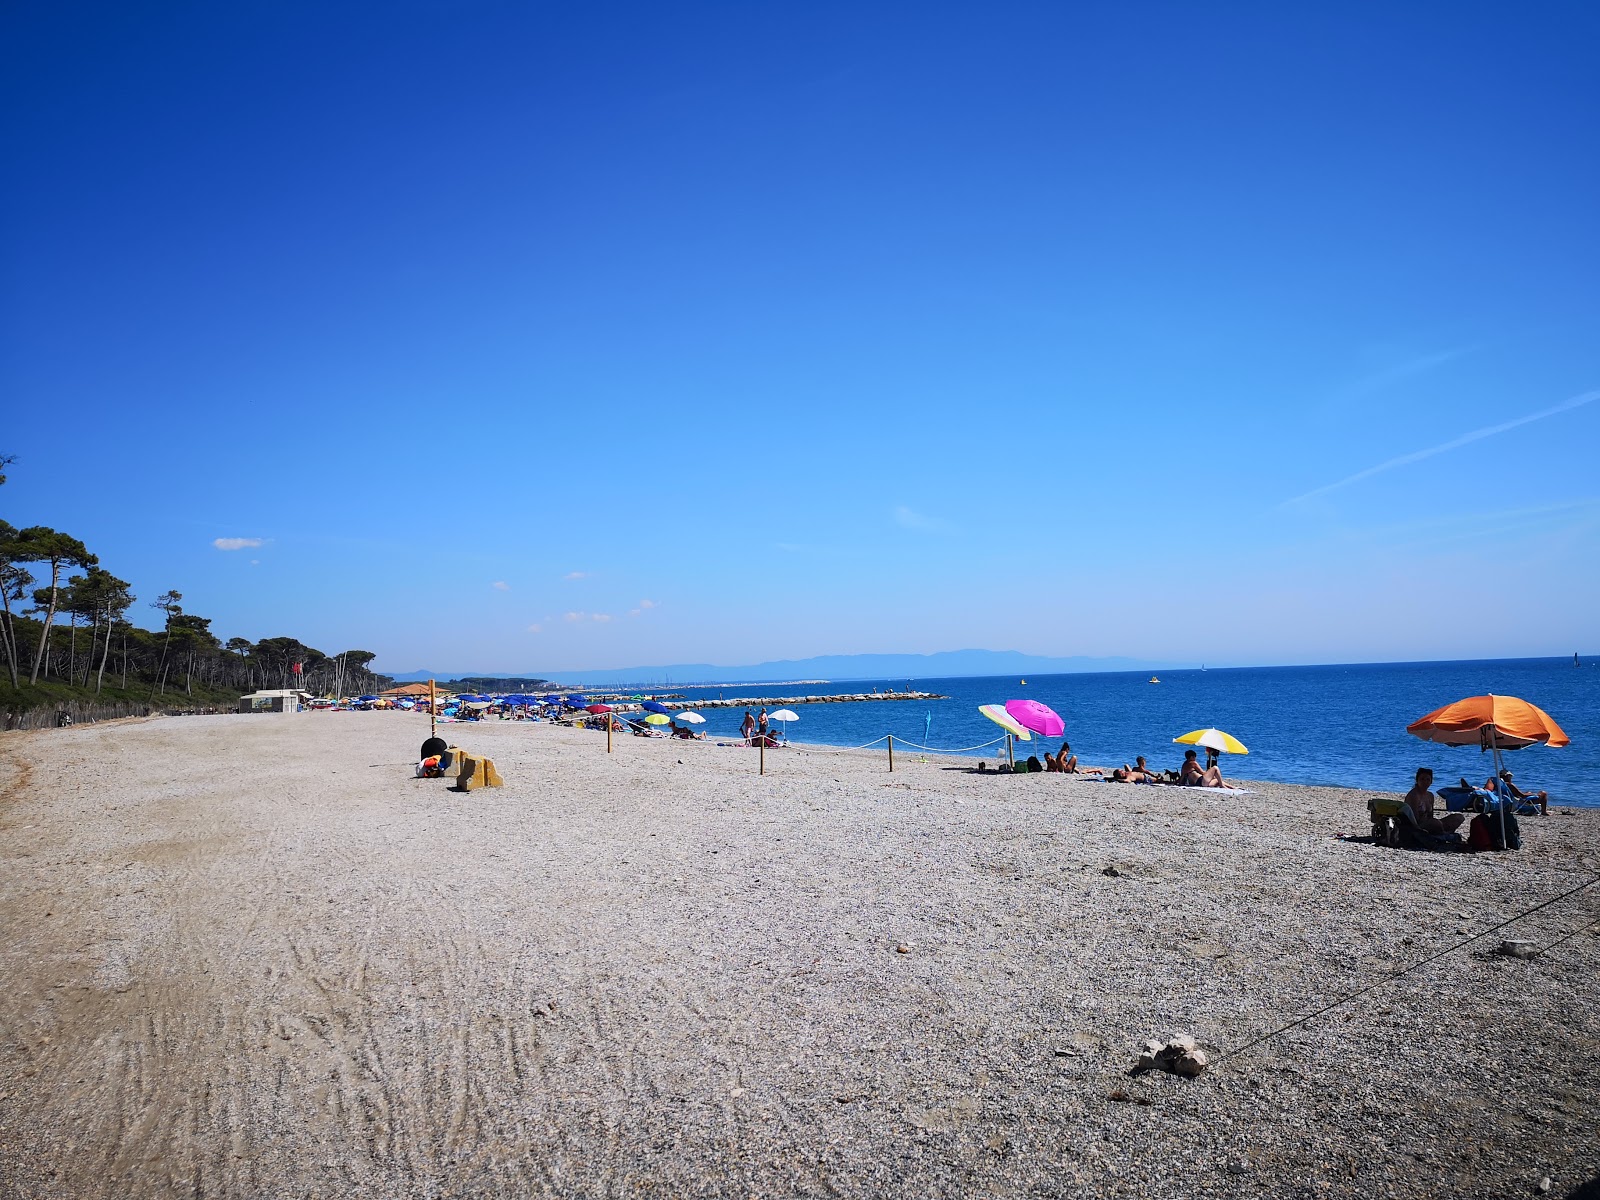 Photo of Spiaggia di Andalu with blue water surface